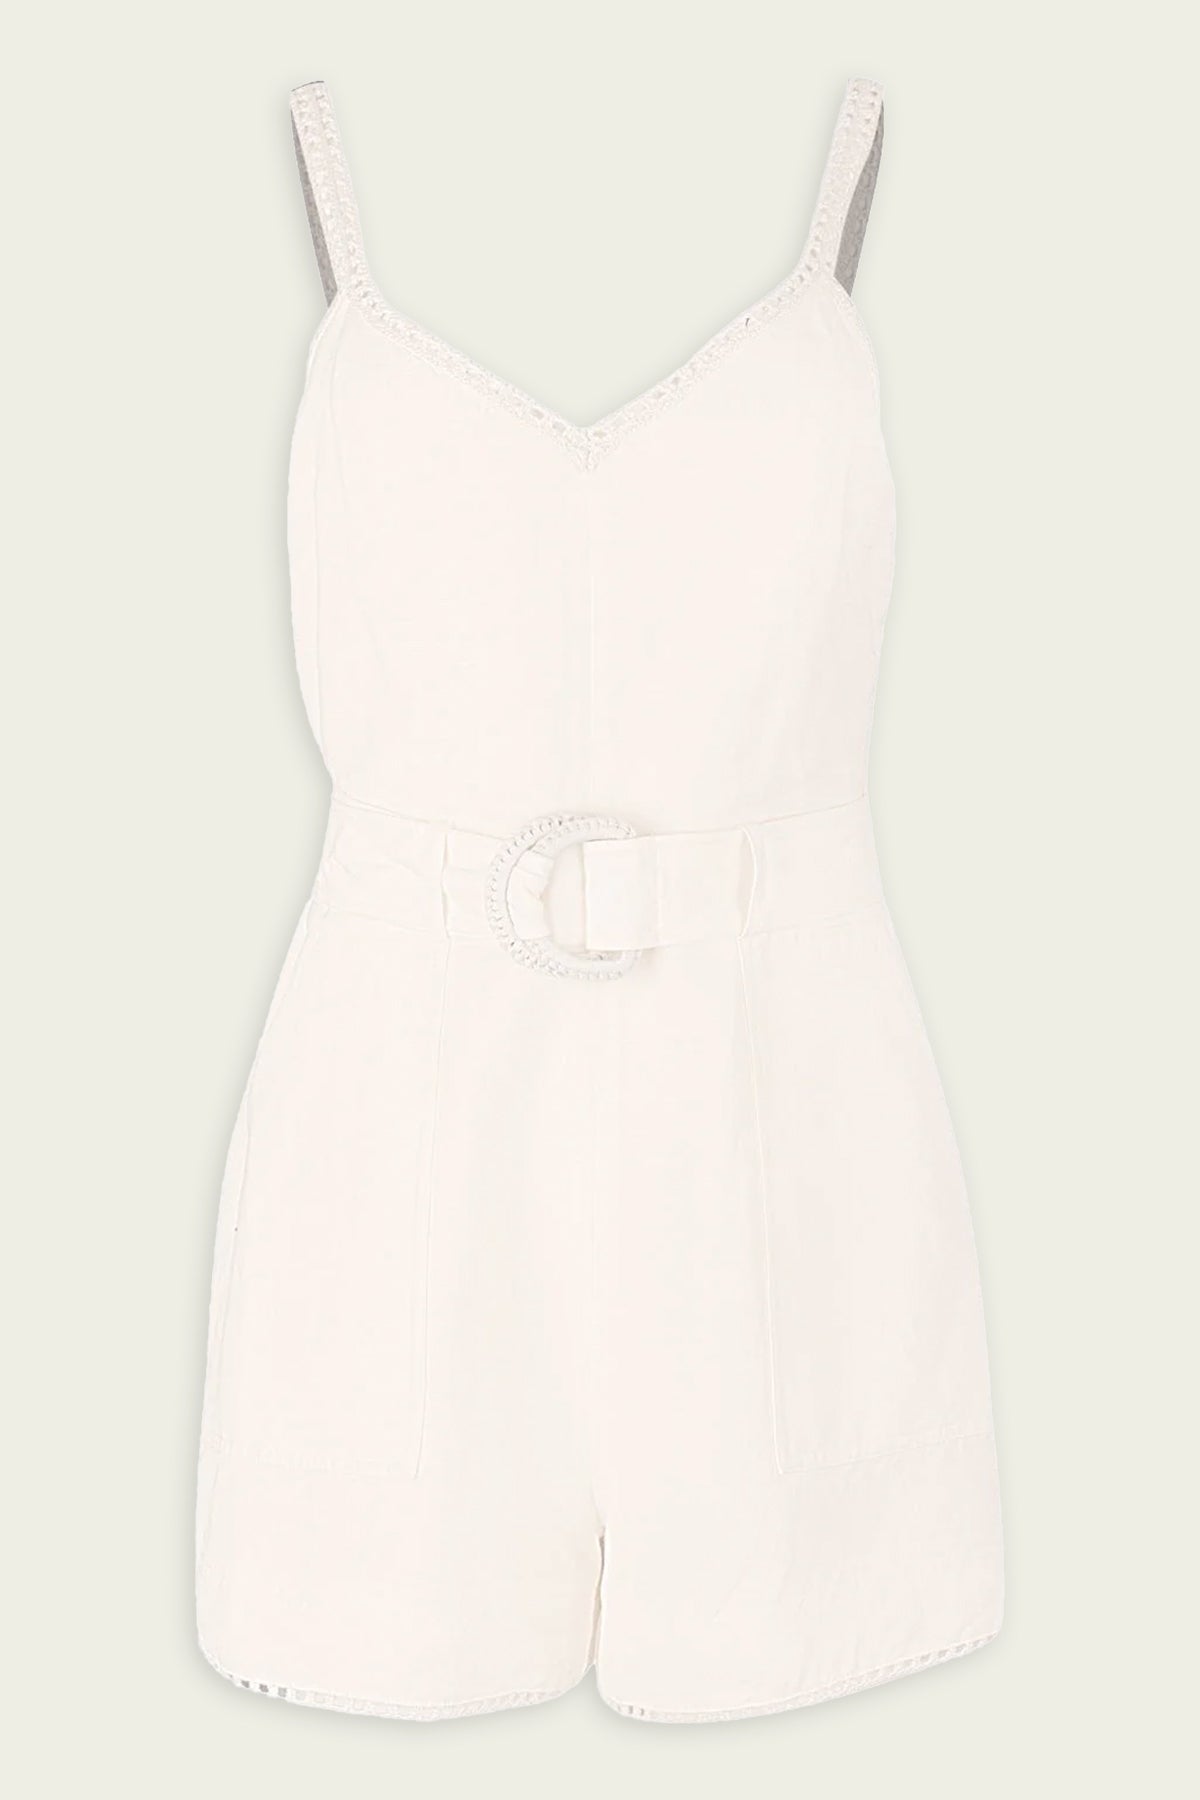 Holloway Belted Romper in White - shop-olivia.com